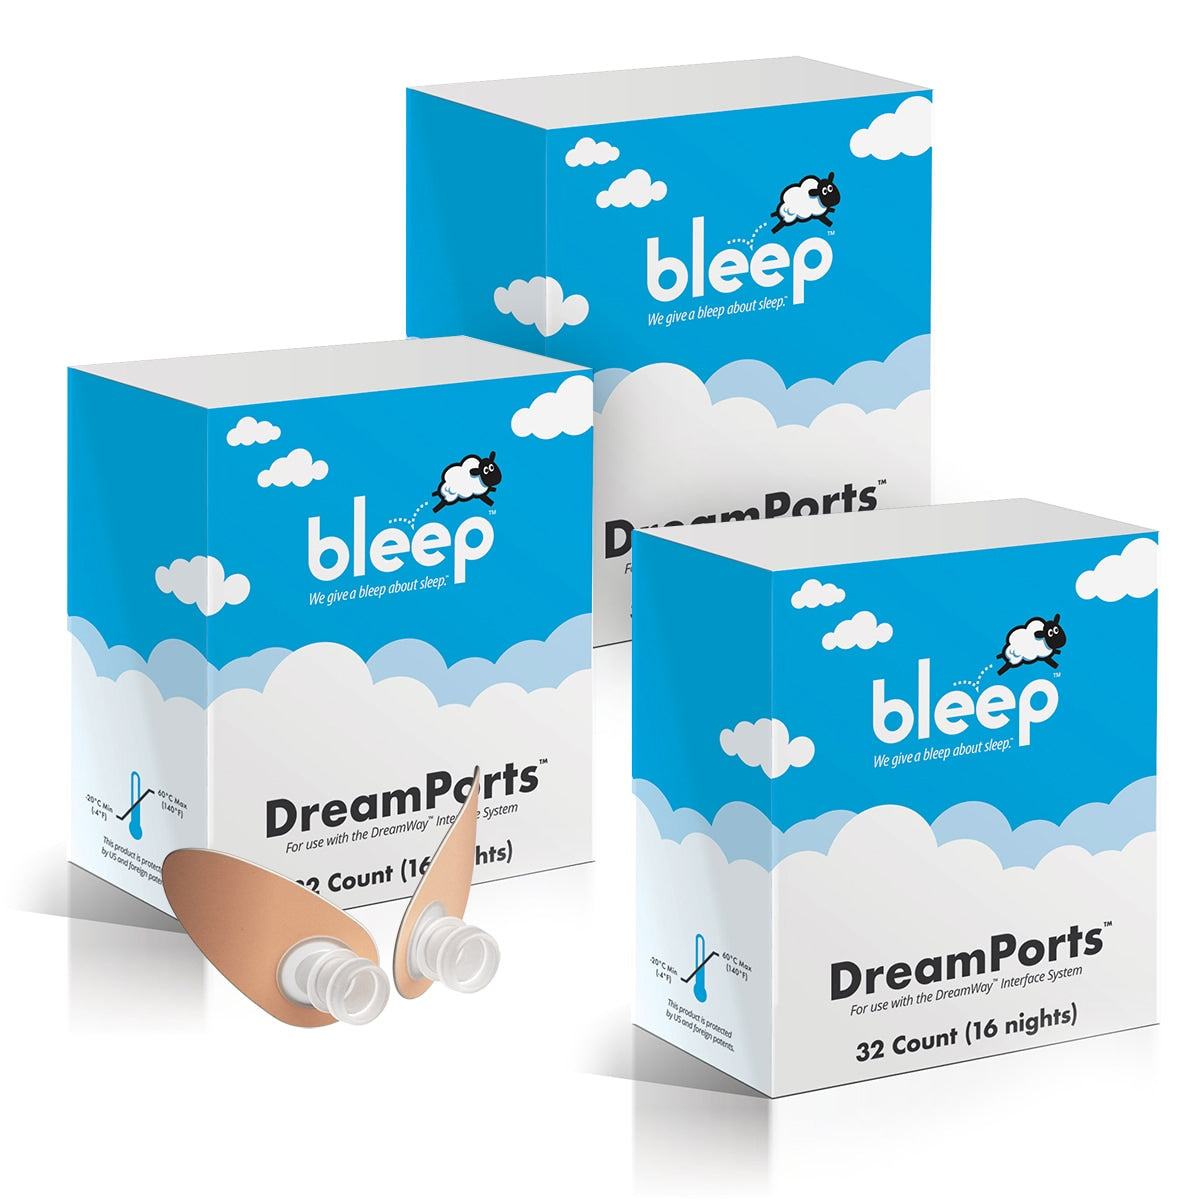 Bleep Adhesive Patches for DreamPort CPAP/BiPAP Masks